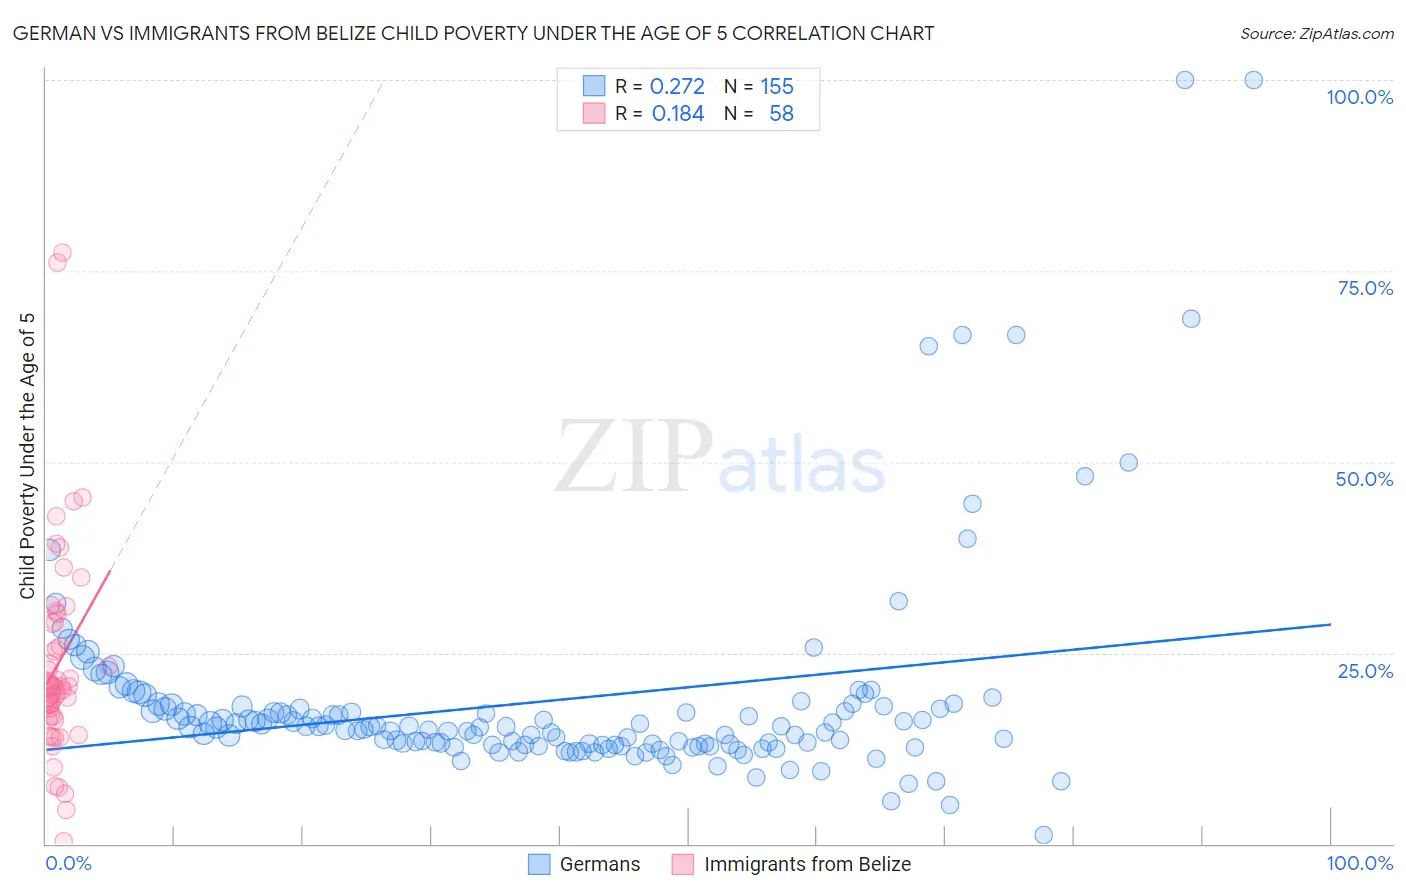 German vs Immigrants from Belize Child Poverty Under the Age of 5